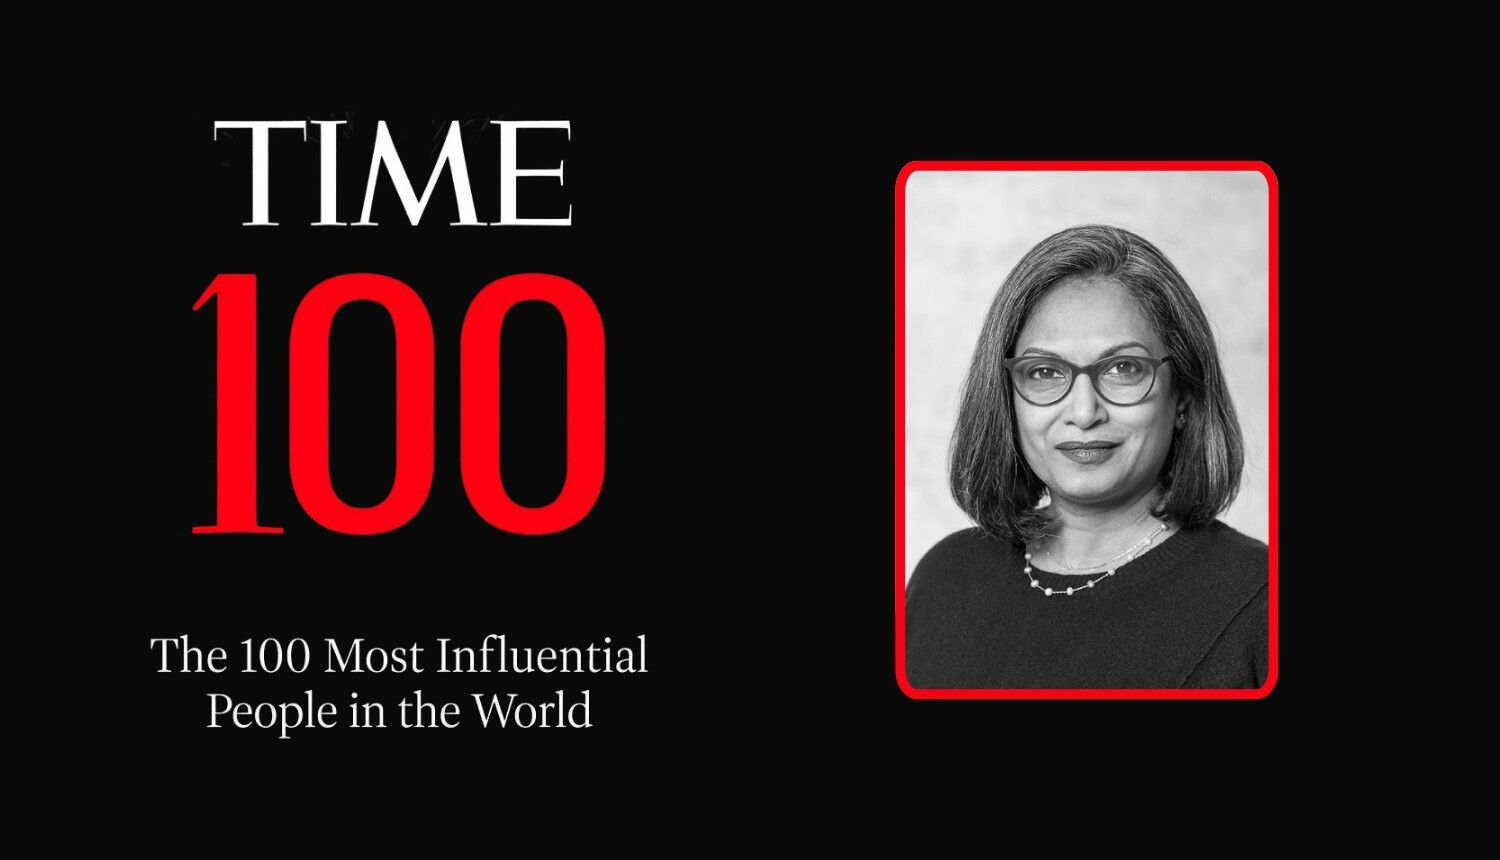 Times named Bangladeshi Marina Tabassum on 100 Most Influential People